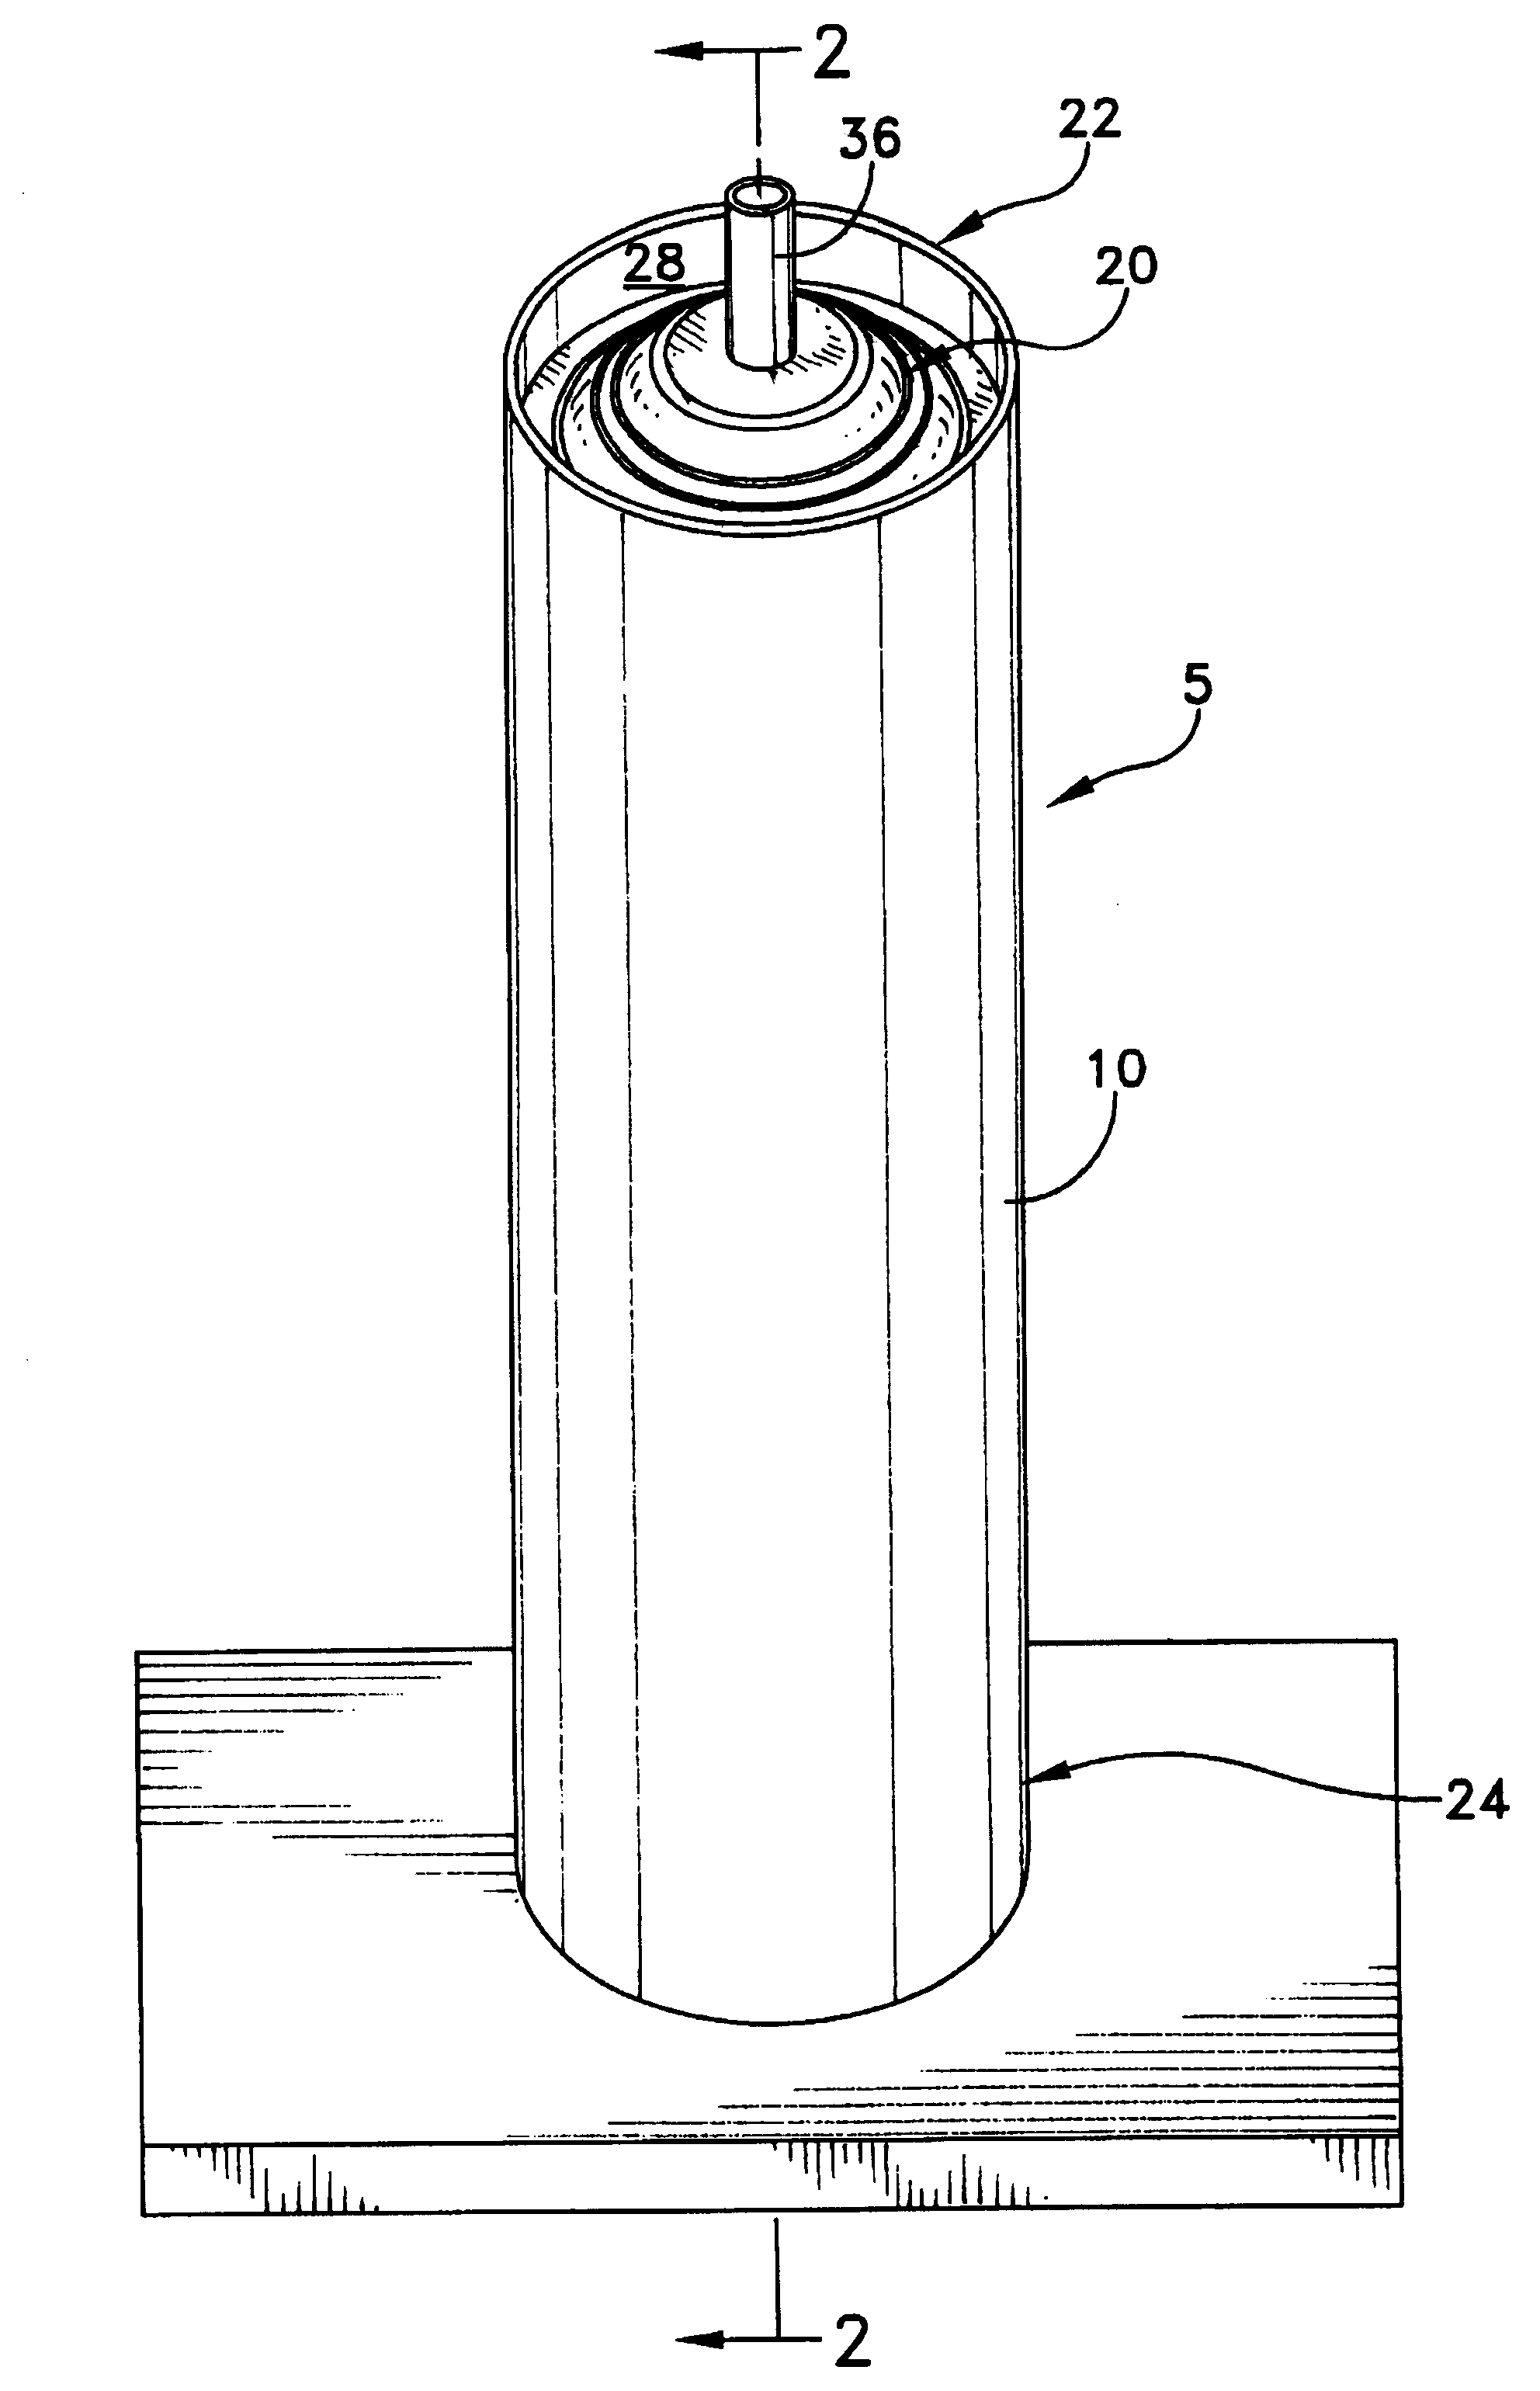 Deformable end cap for heat pipe